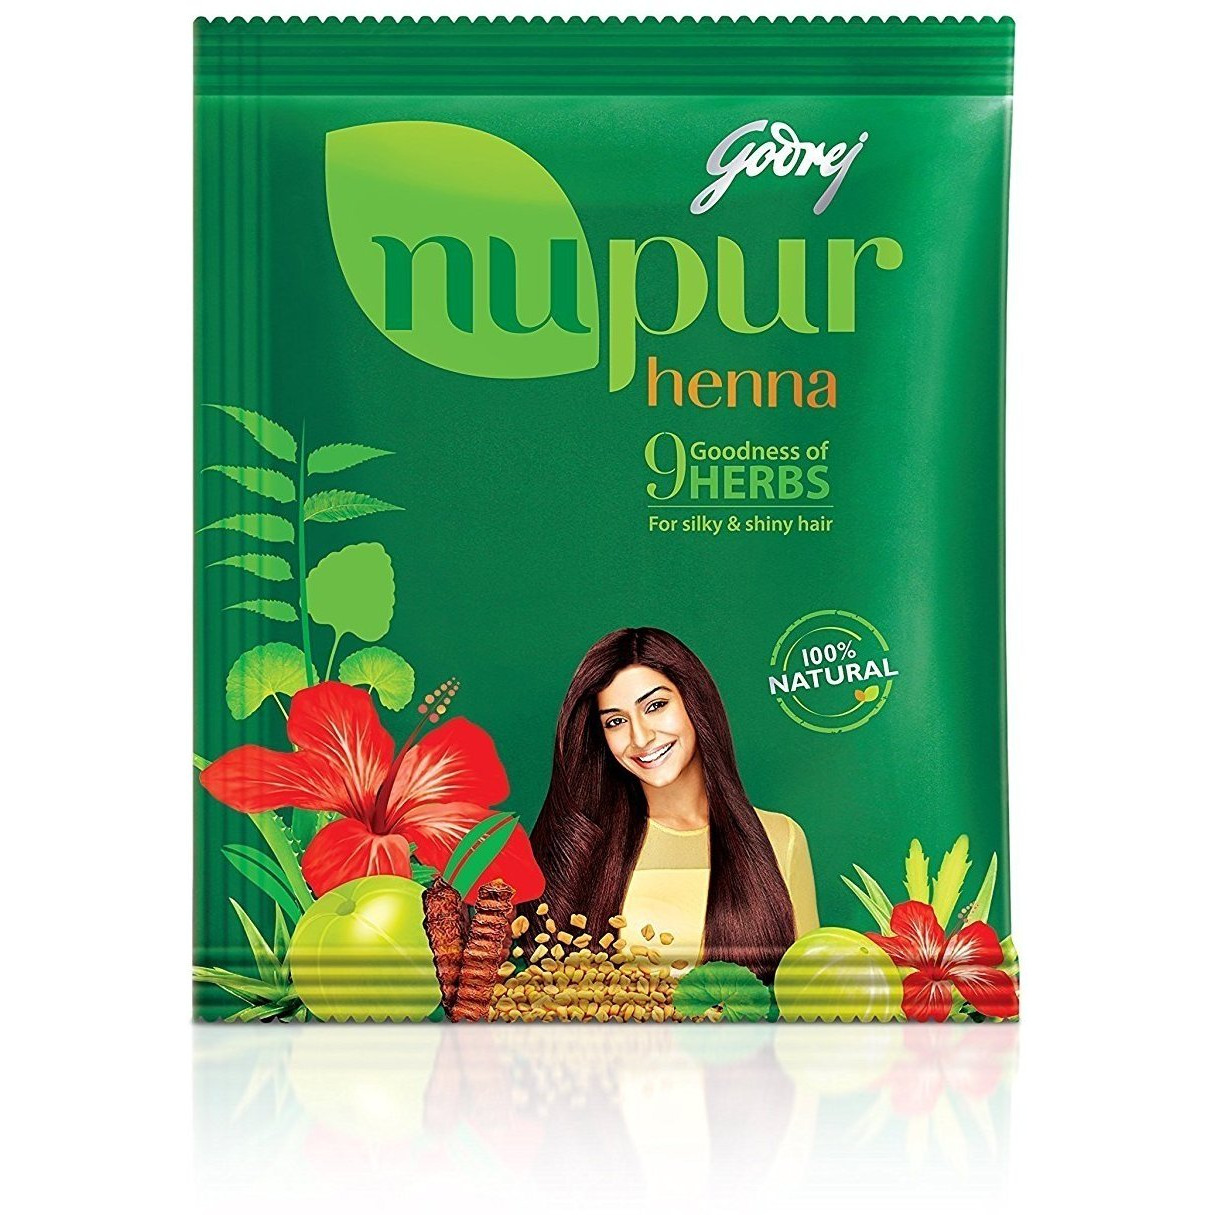 Godrej Nupur Natural Mehndi with Goodness of 9 Herbs - 450 Gm (Pack of 3)